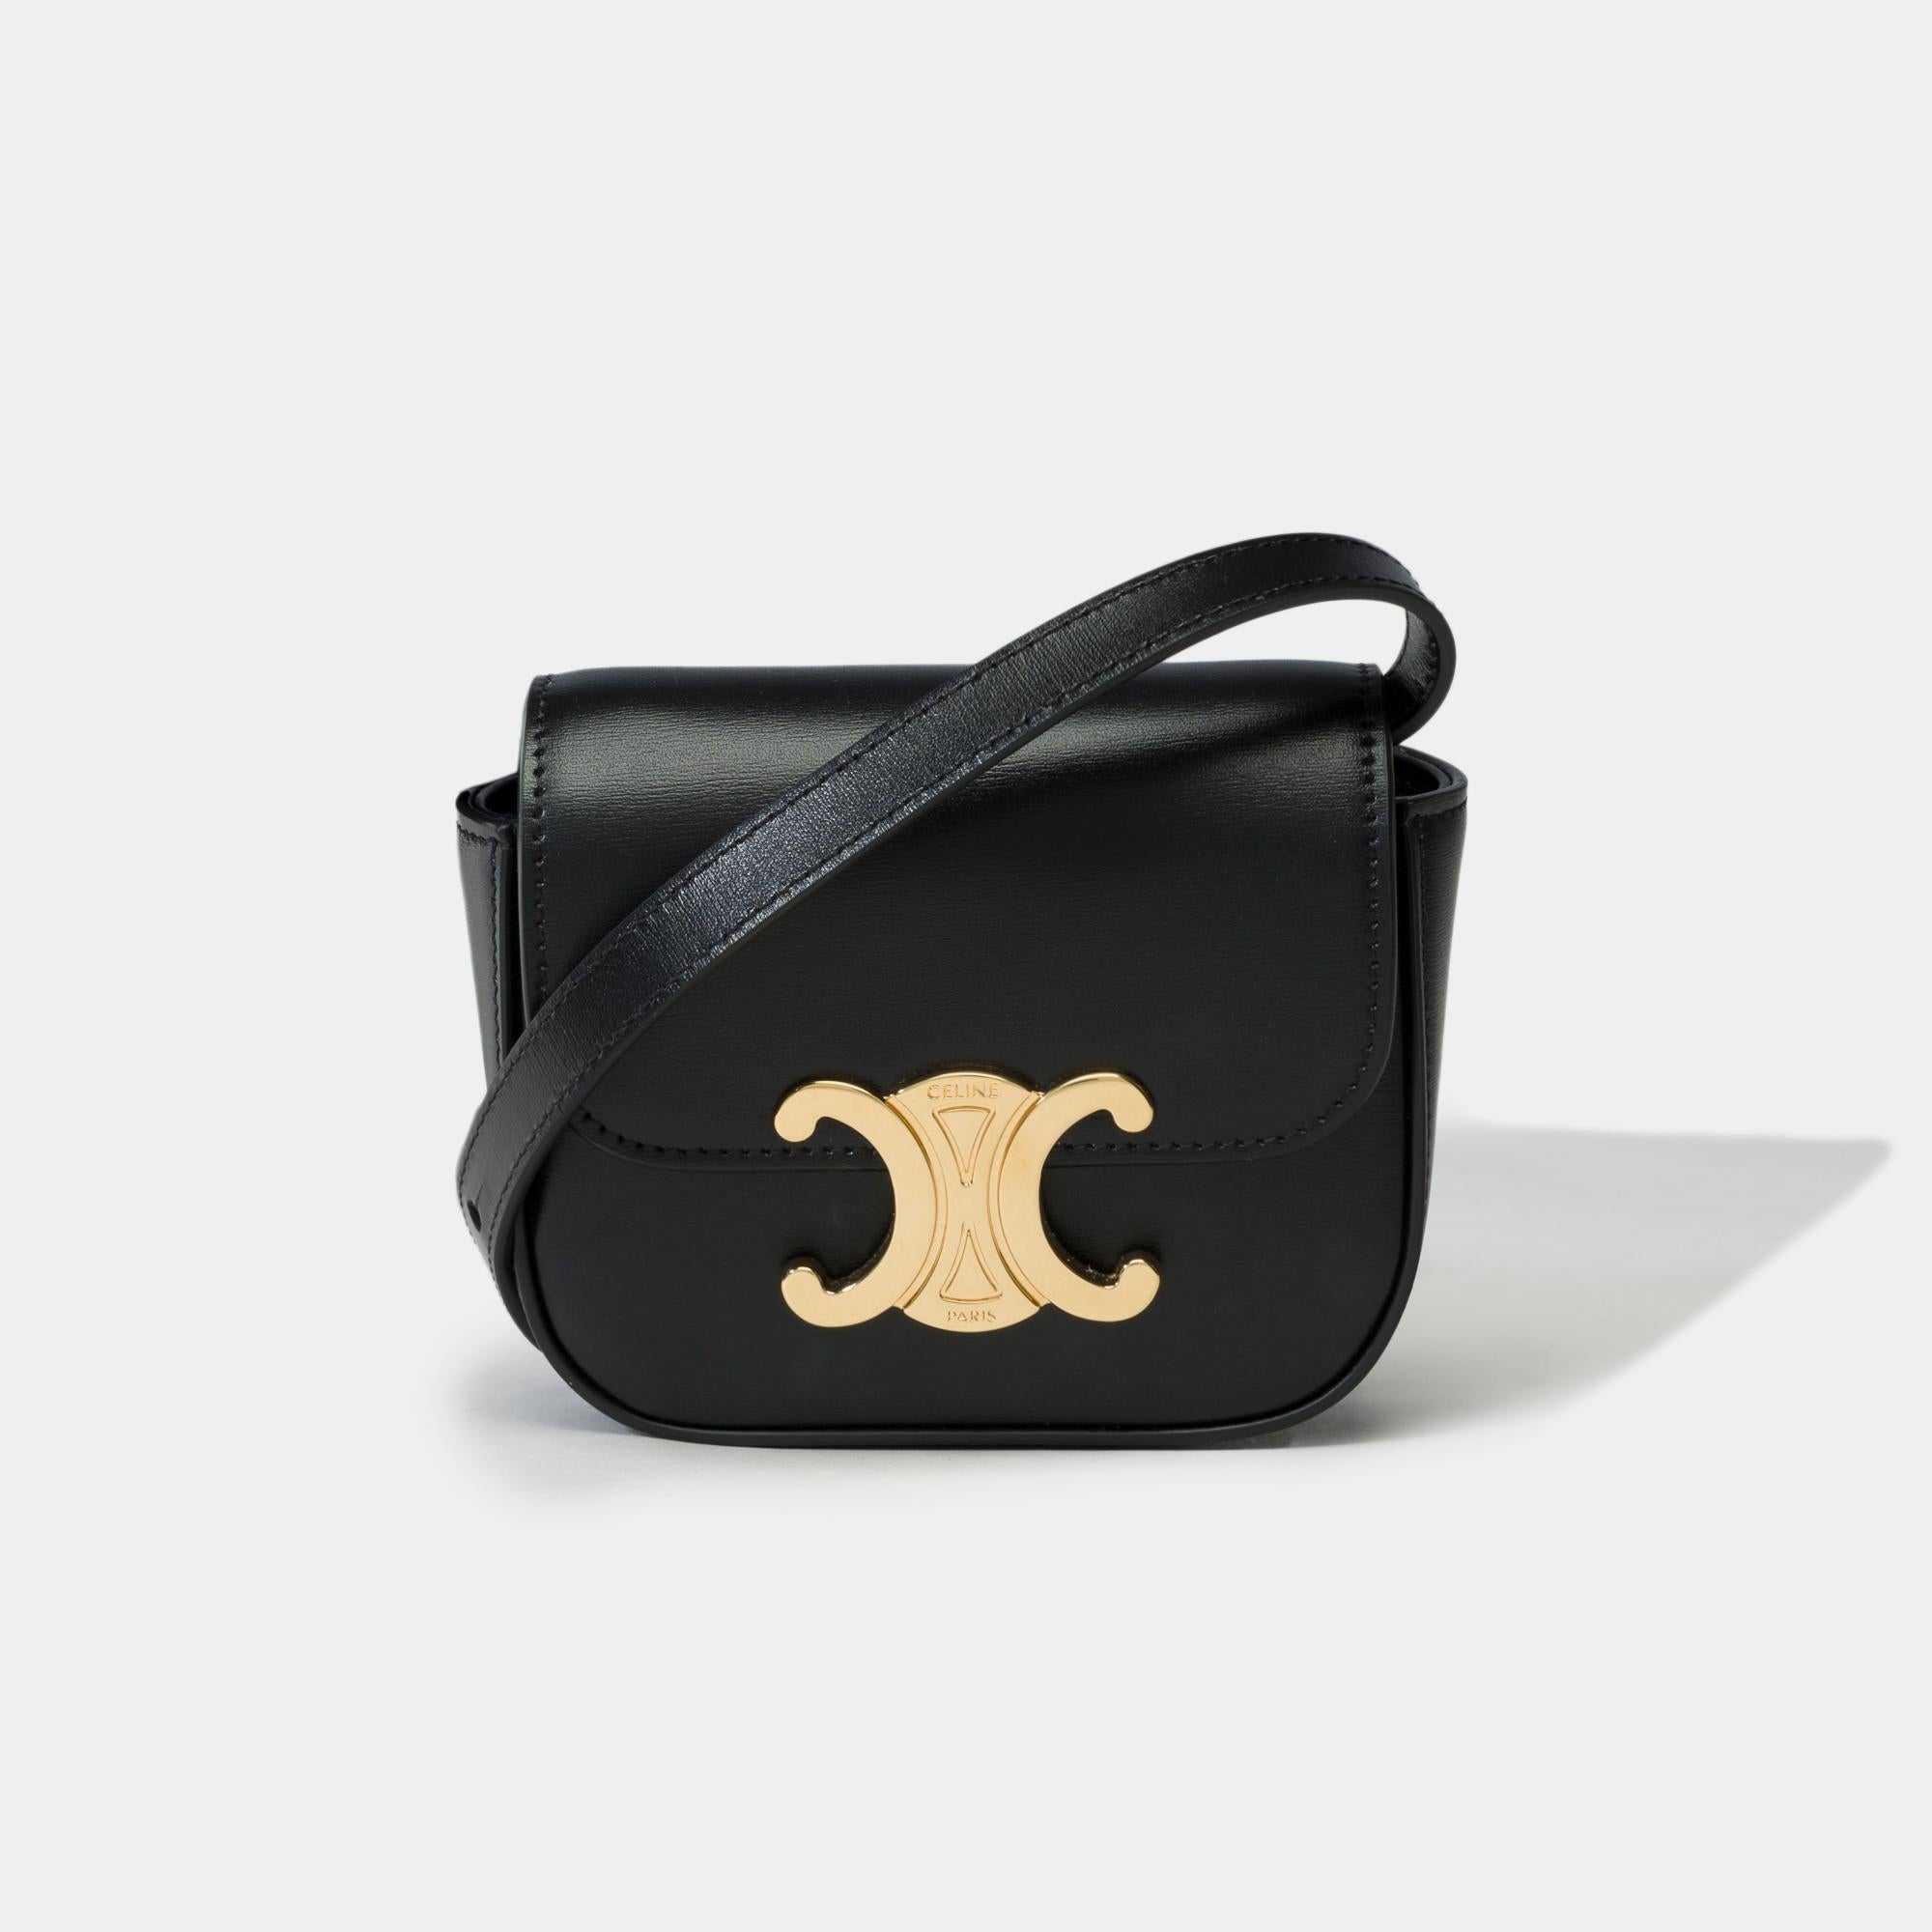 Gorgeous​ ​Celine​ ​Mini​ ​Triomphe​ ​shoulder​ ​bag​ ​in​ ​black​ ​box​ ​calf​ ​leather​ ​and​ ​gold​ ​trim,​ ​removable​ ​and​ ​adjustable​ ​shoulder​ ​strap​ ​in​ ​black​ ​box​ ​calf​ ​leather​ ​allowing​ ​a​ ​shoulder​ ​or​ ​crossbody​